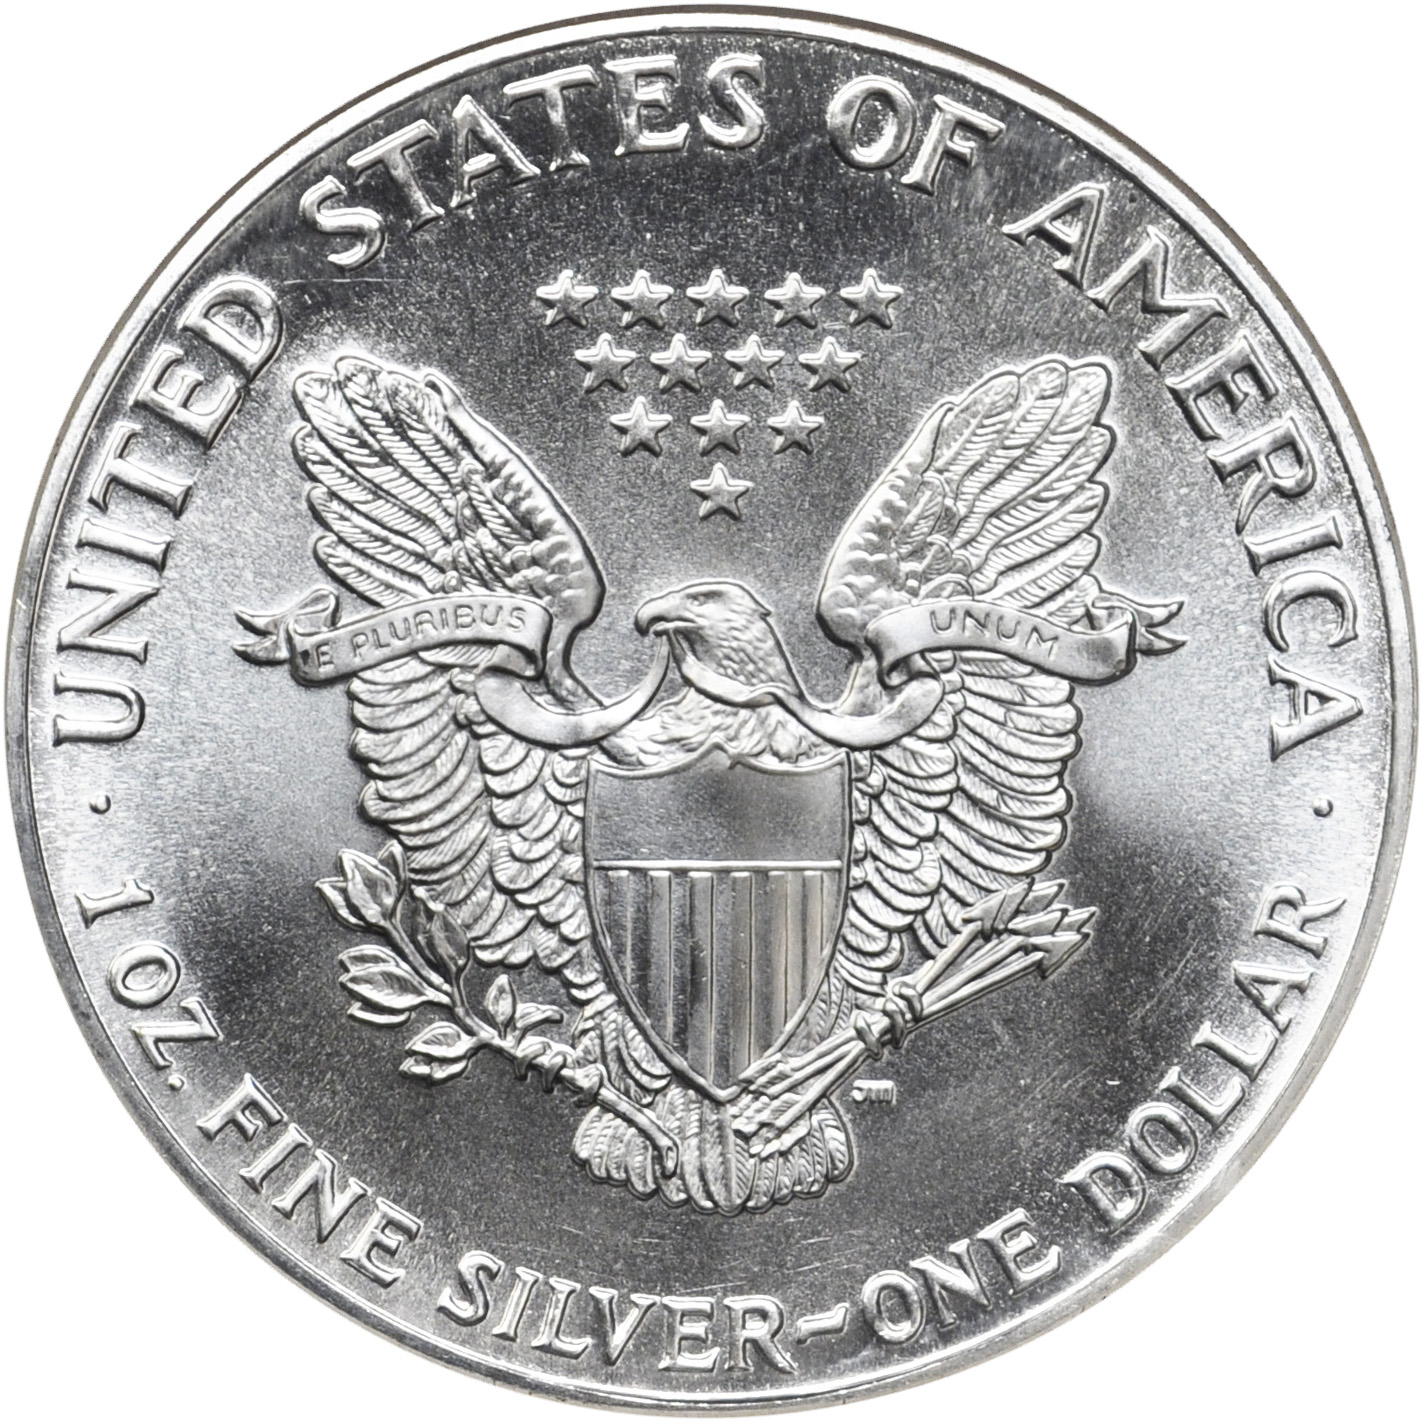 Sell American Silver Eagle $1 Coins | ASE Price and Value Guide